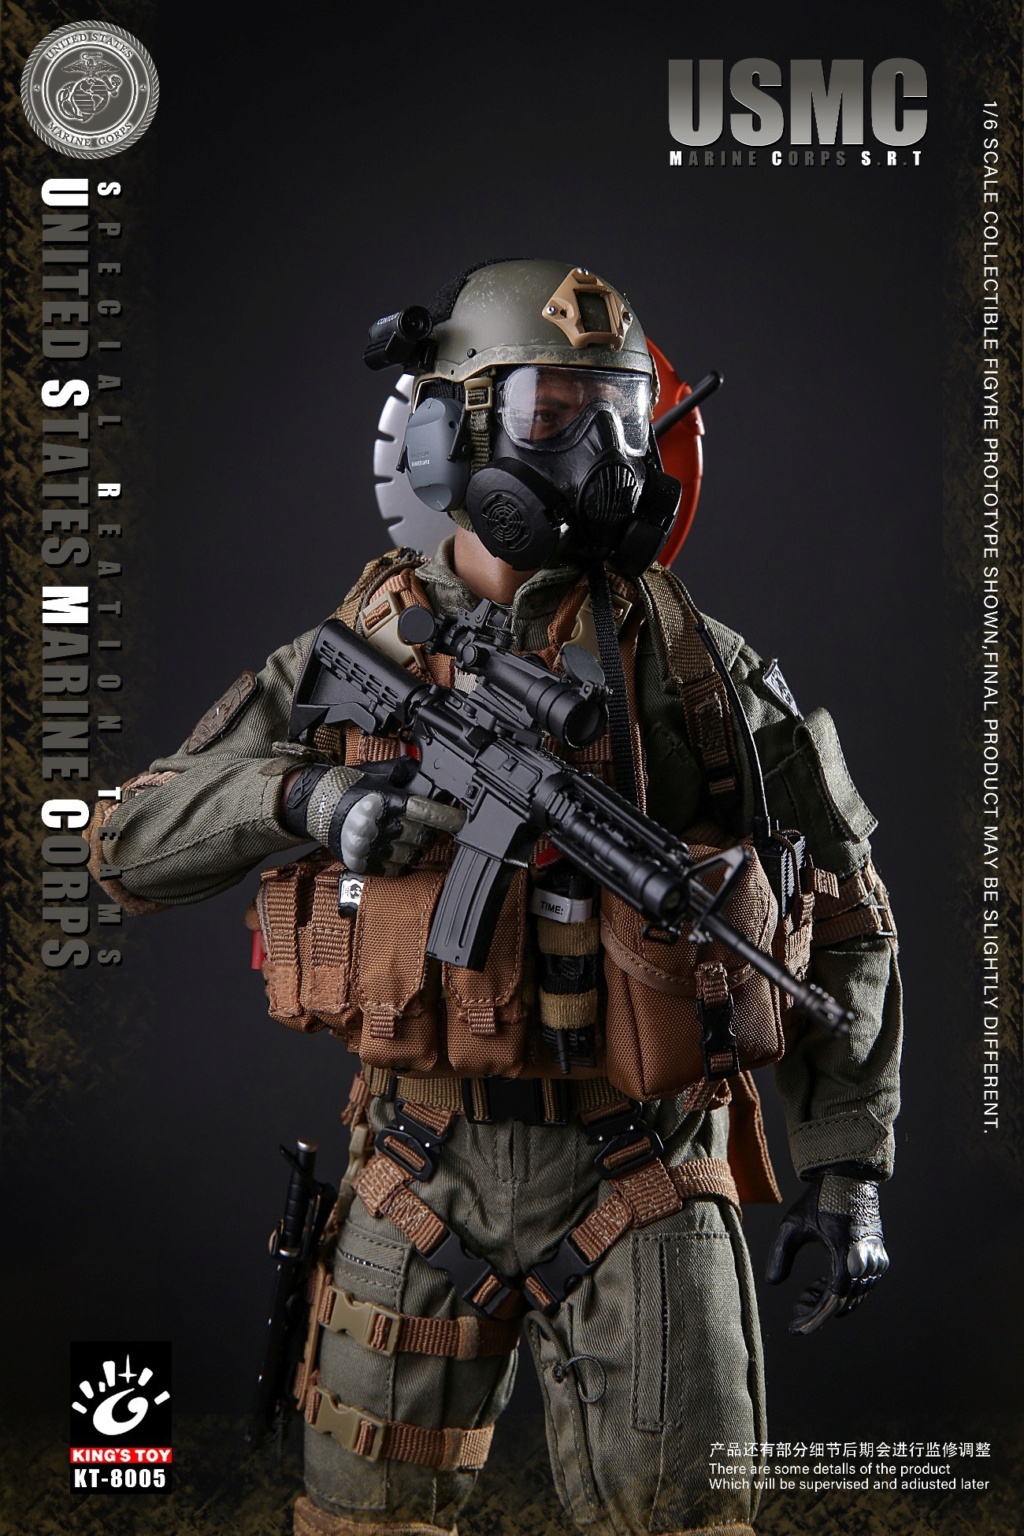 ModernMilitary - NEW PRODUCT: King's Toy: 1/6 USMC SRT US Marine Corps Special Response Team (#KT-8005) 09515911